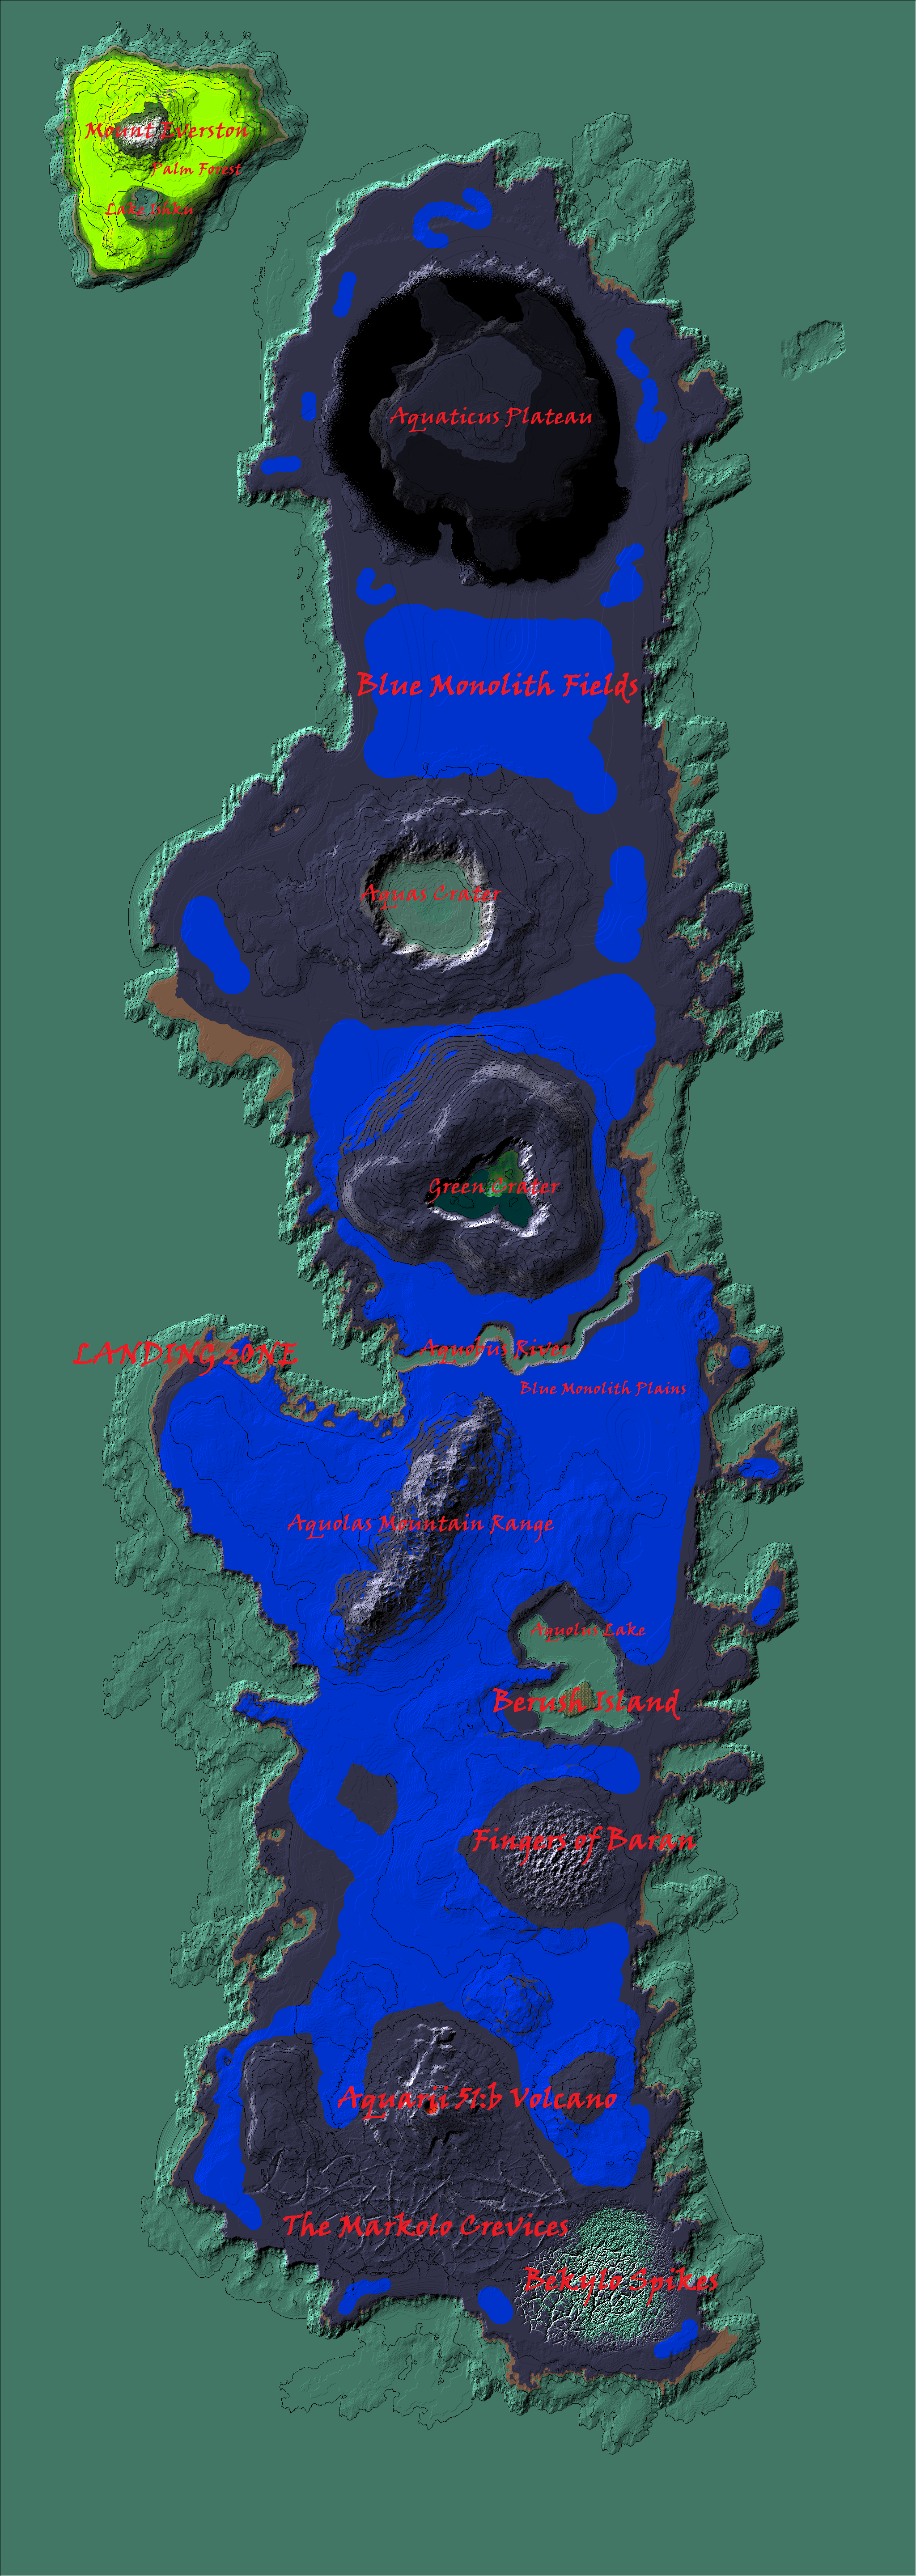 Aquarii 51 Survival Map by Raysss